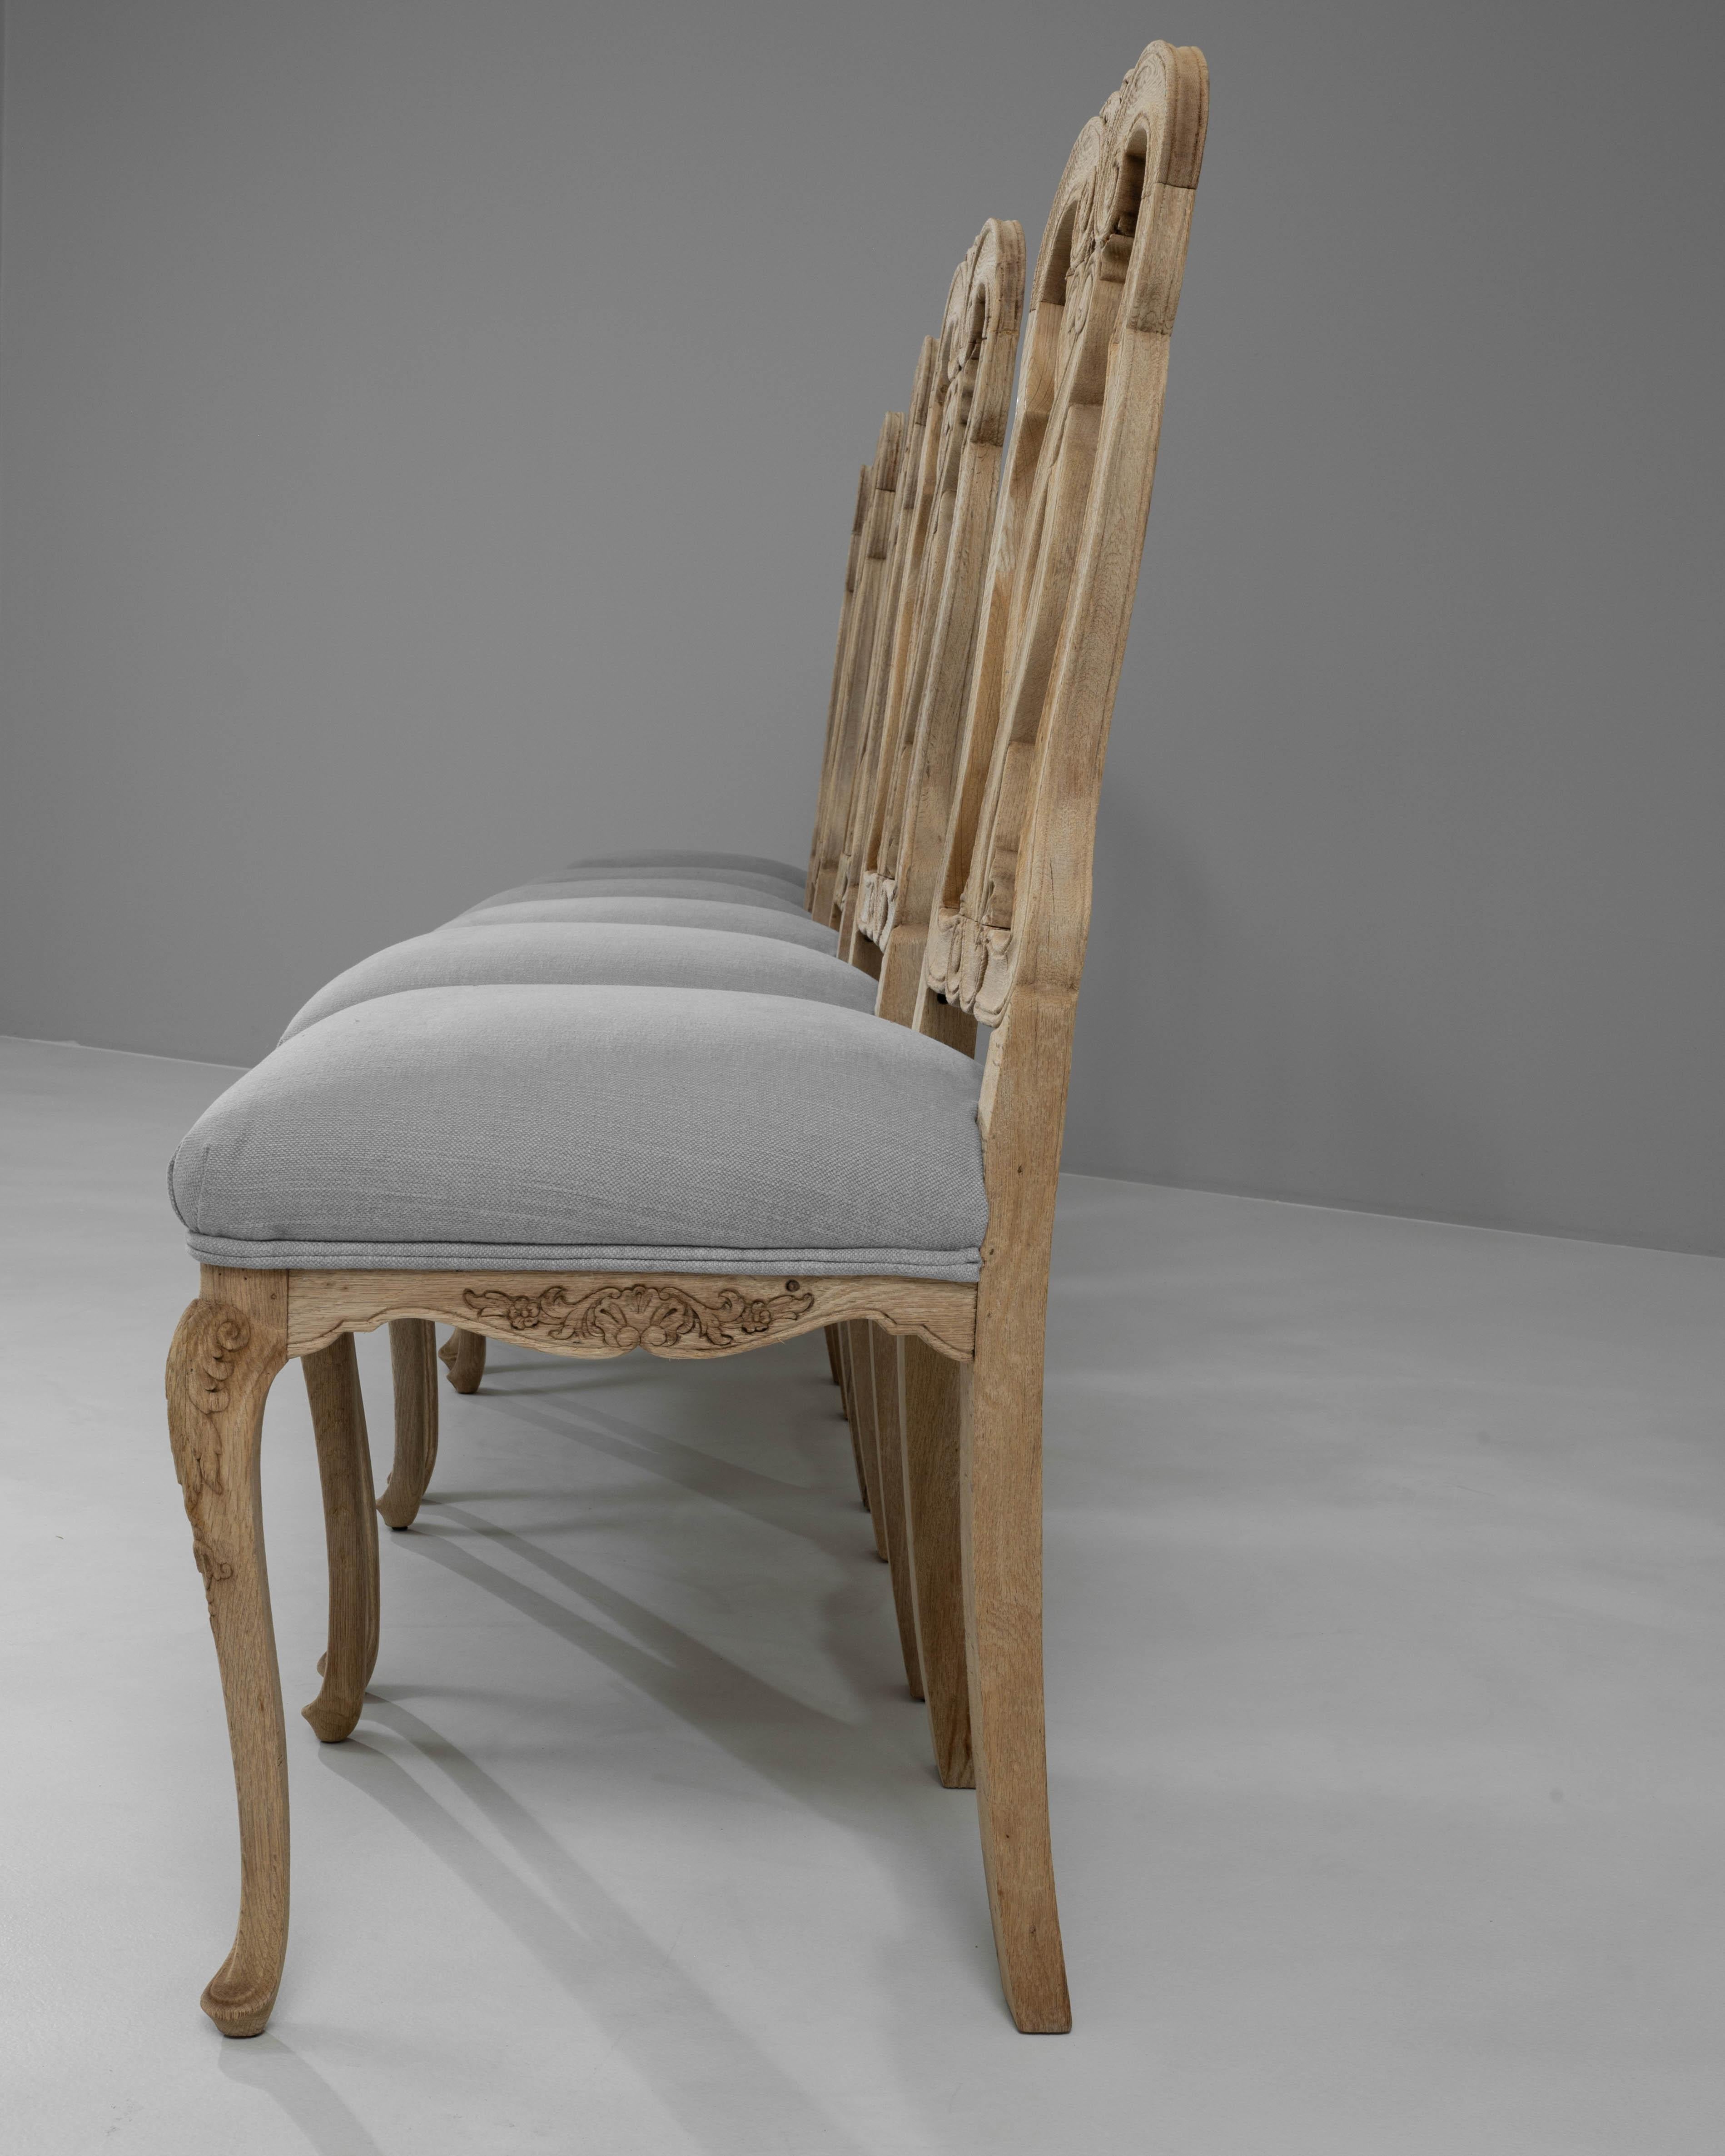 20th Century French Bleached Oak Dining Chairs With Upholstered Seats, Set of 6 For Sale 8